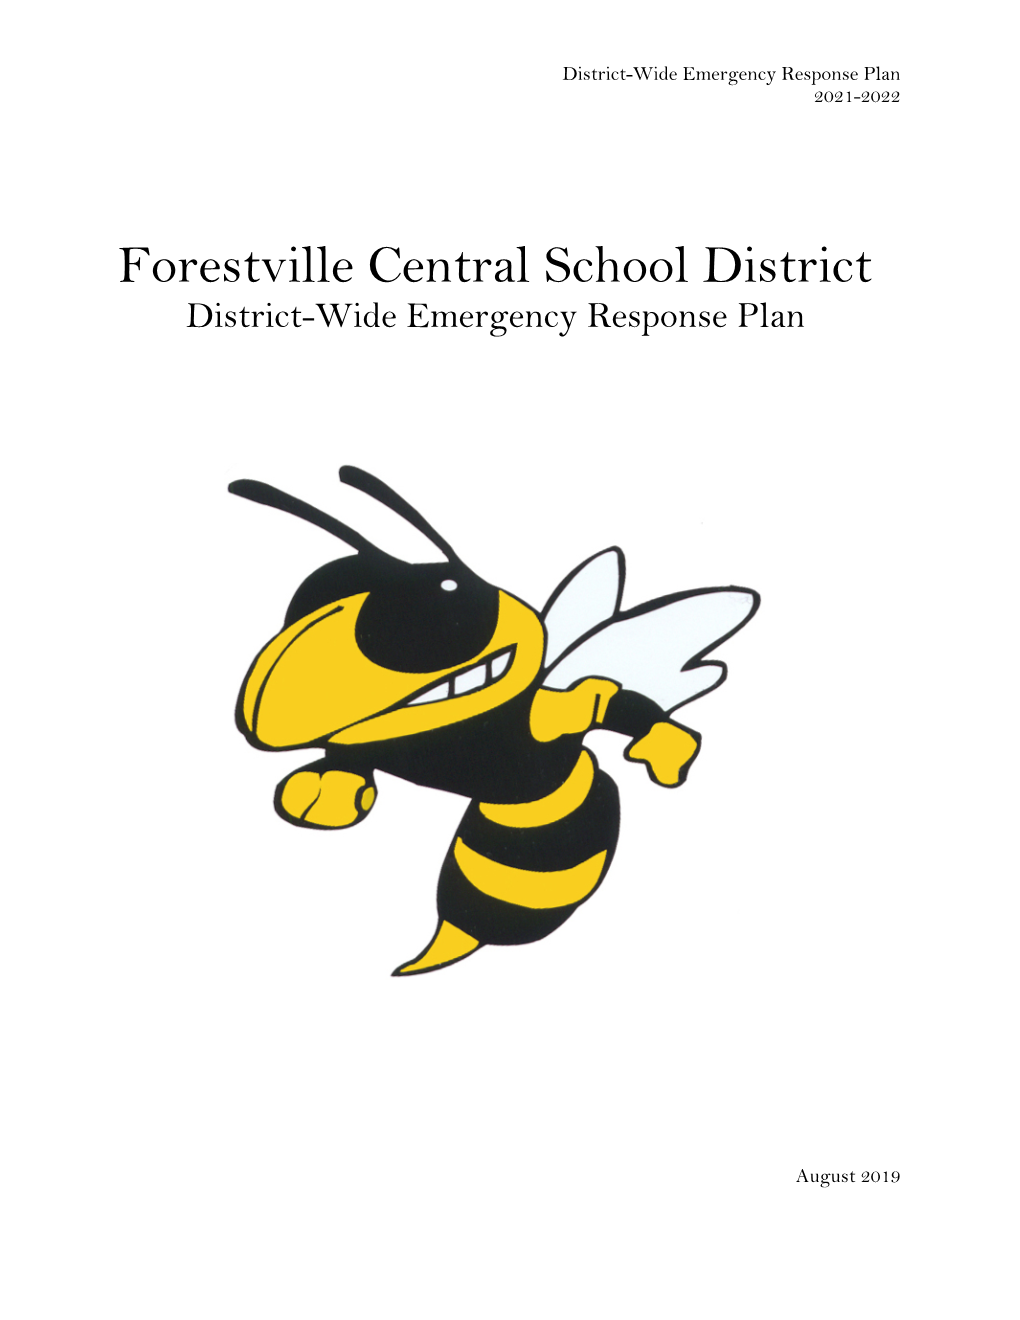 Nw York State Guide to School Emergency Response Planning